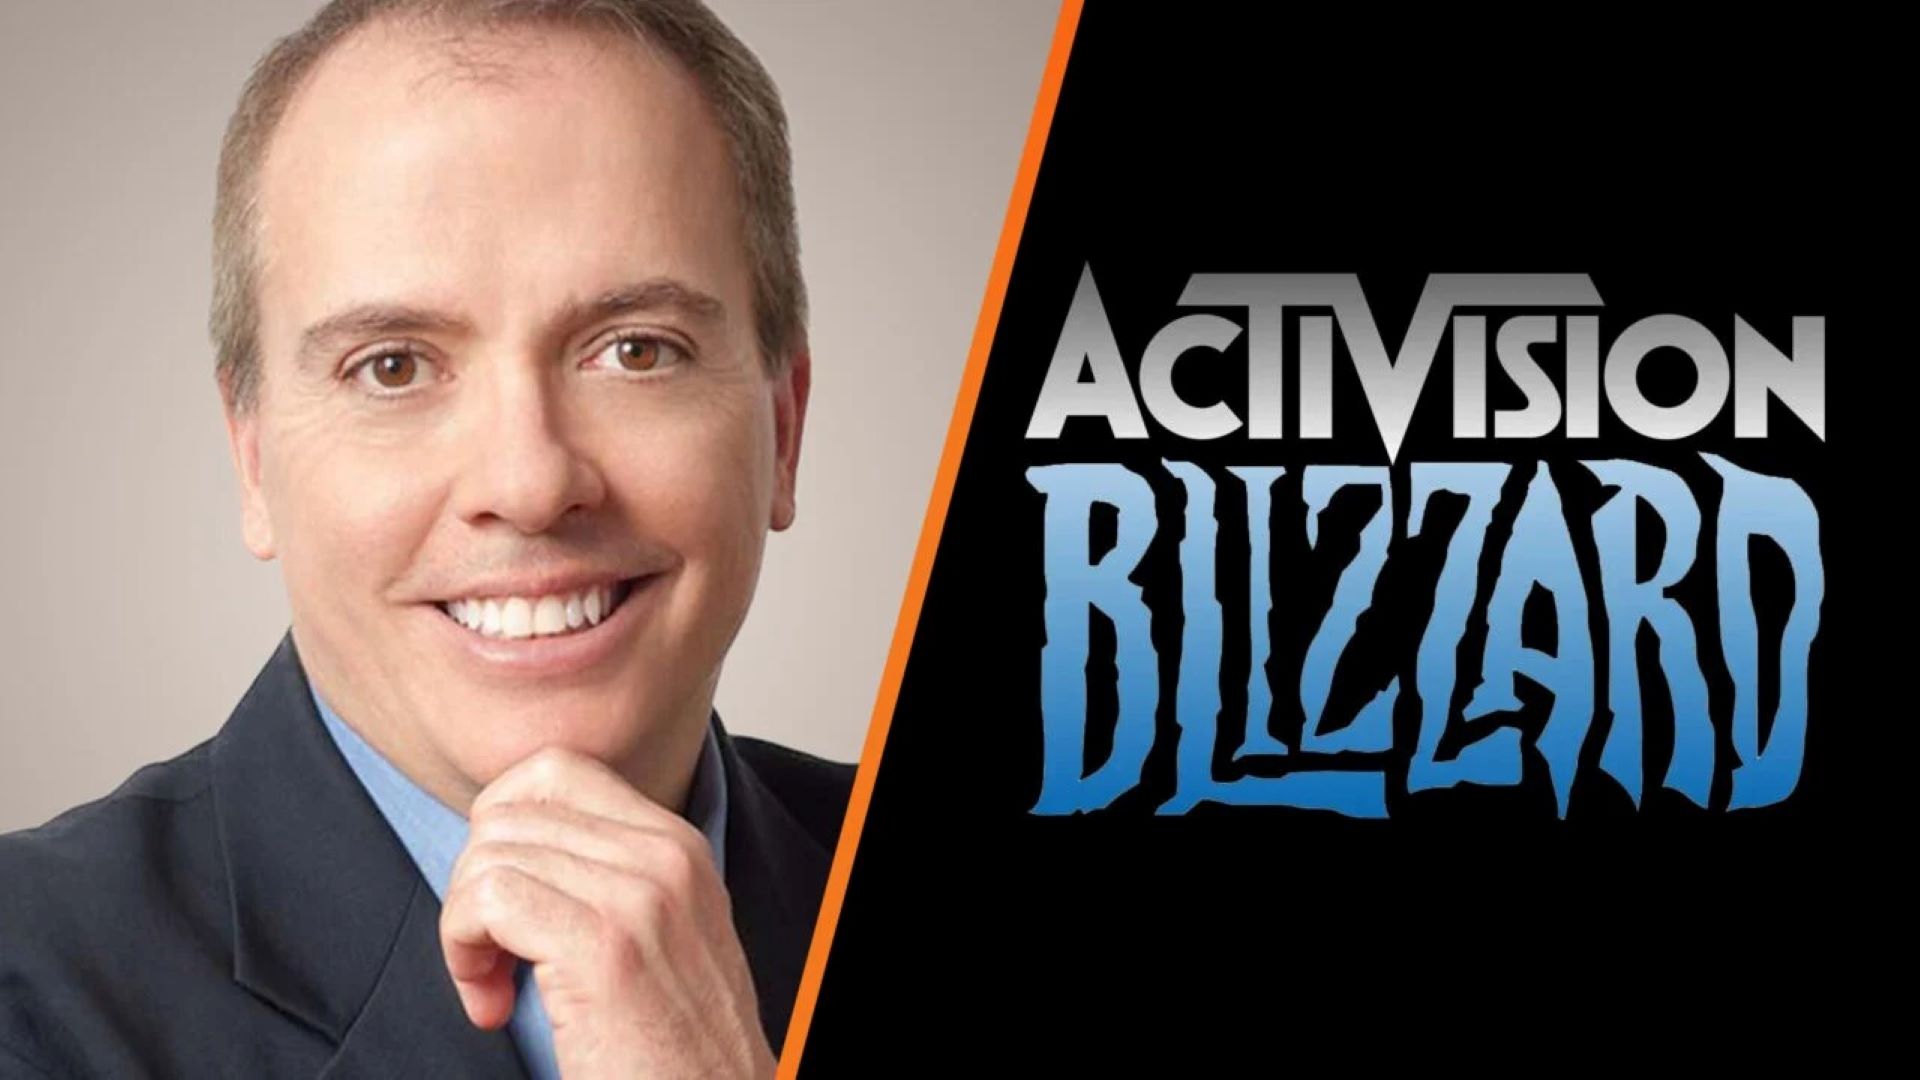 activision blizzards president and coo  Image of activision blizzards president and coo